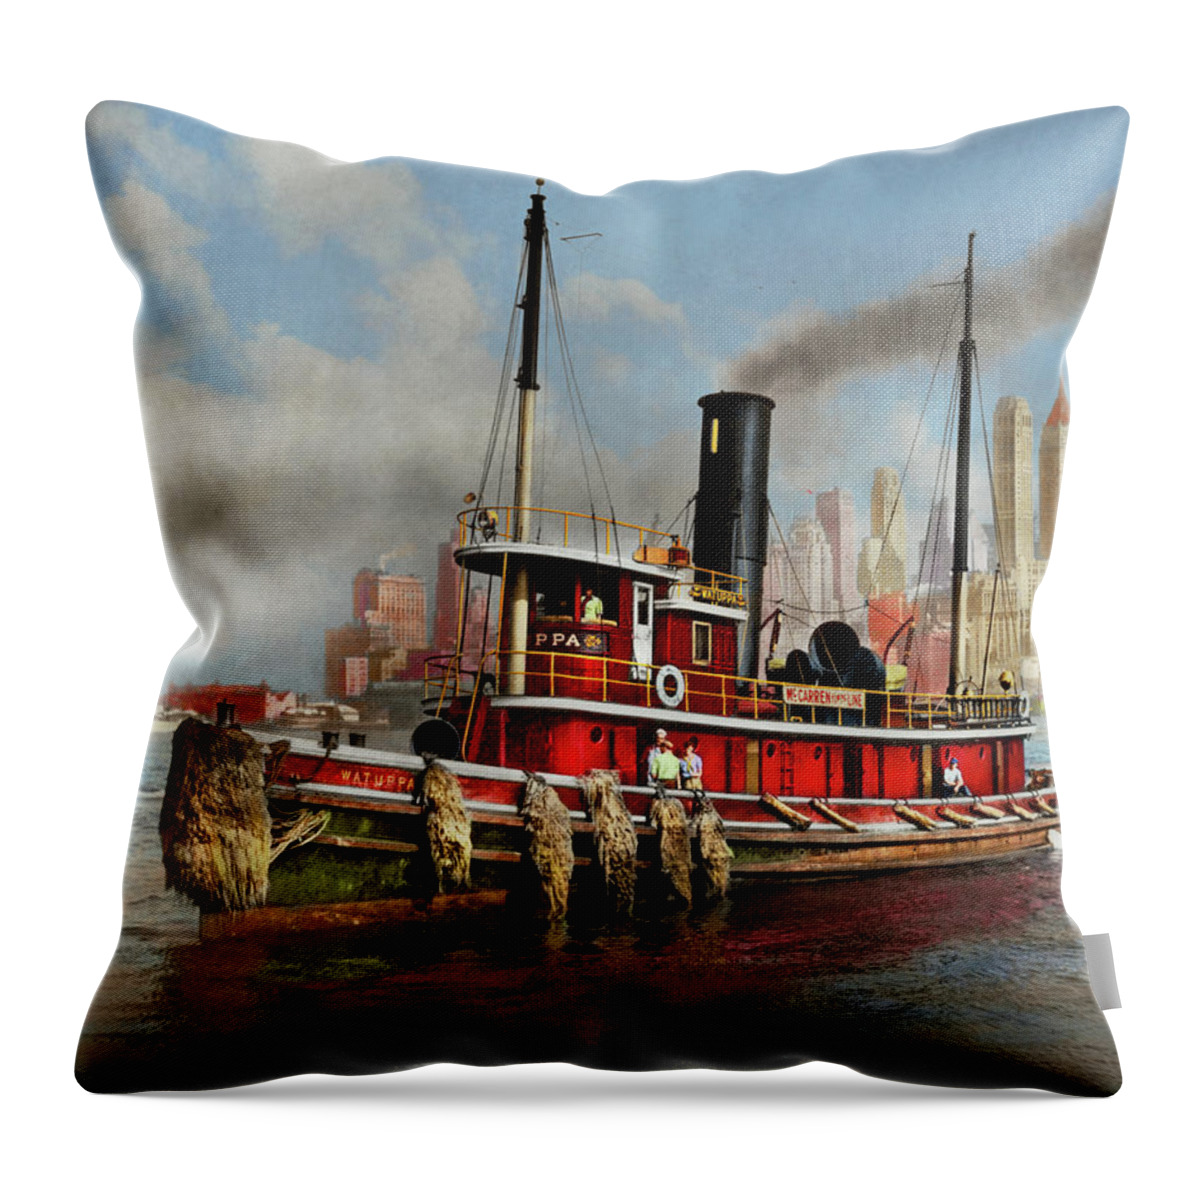 Tub Boat Throw Pillow featuring the photograph Boat - Tugboat - The Watuppa 1935 by Mike Savad